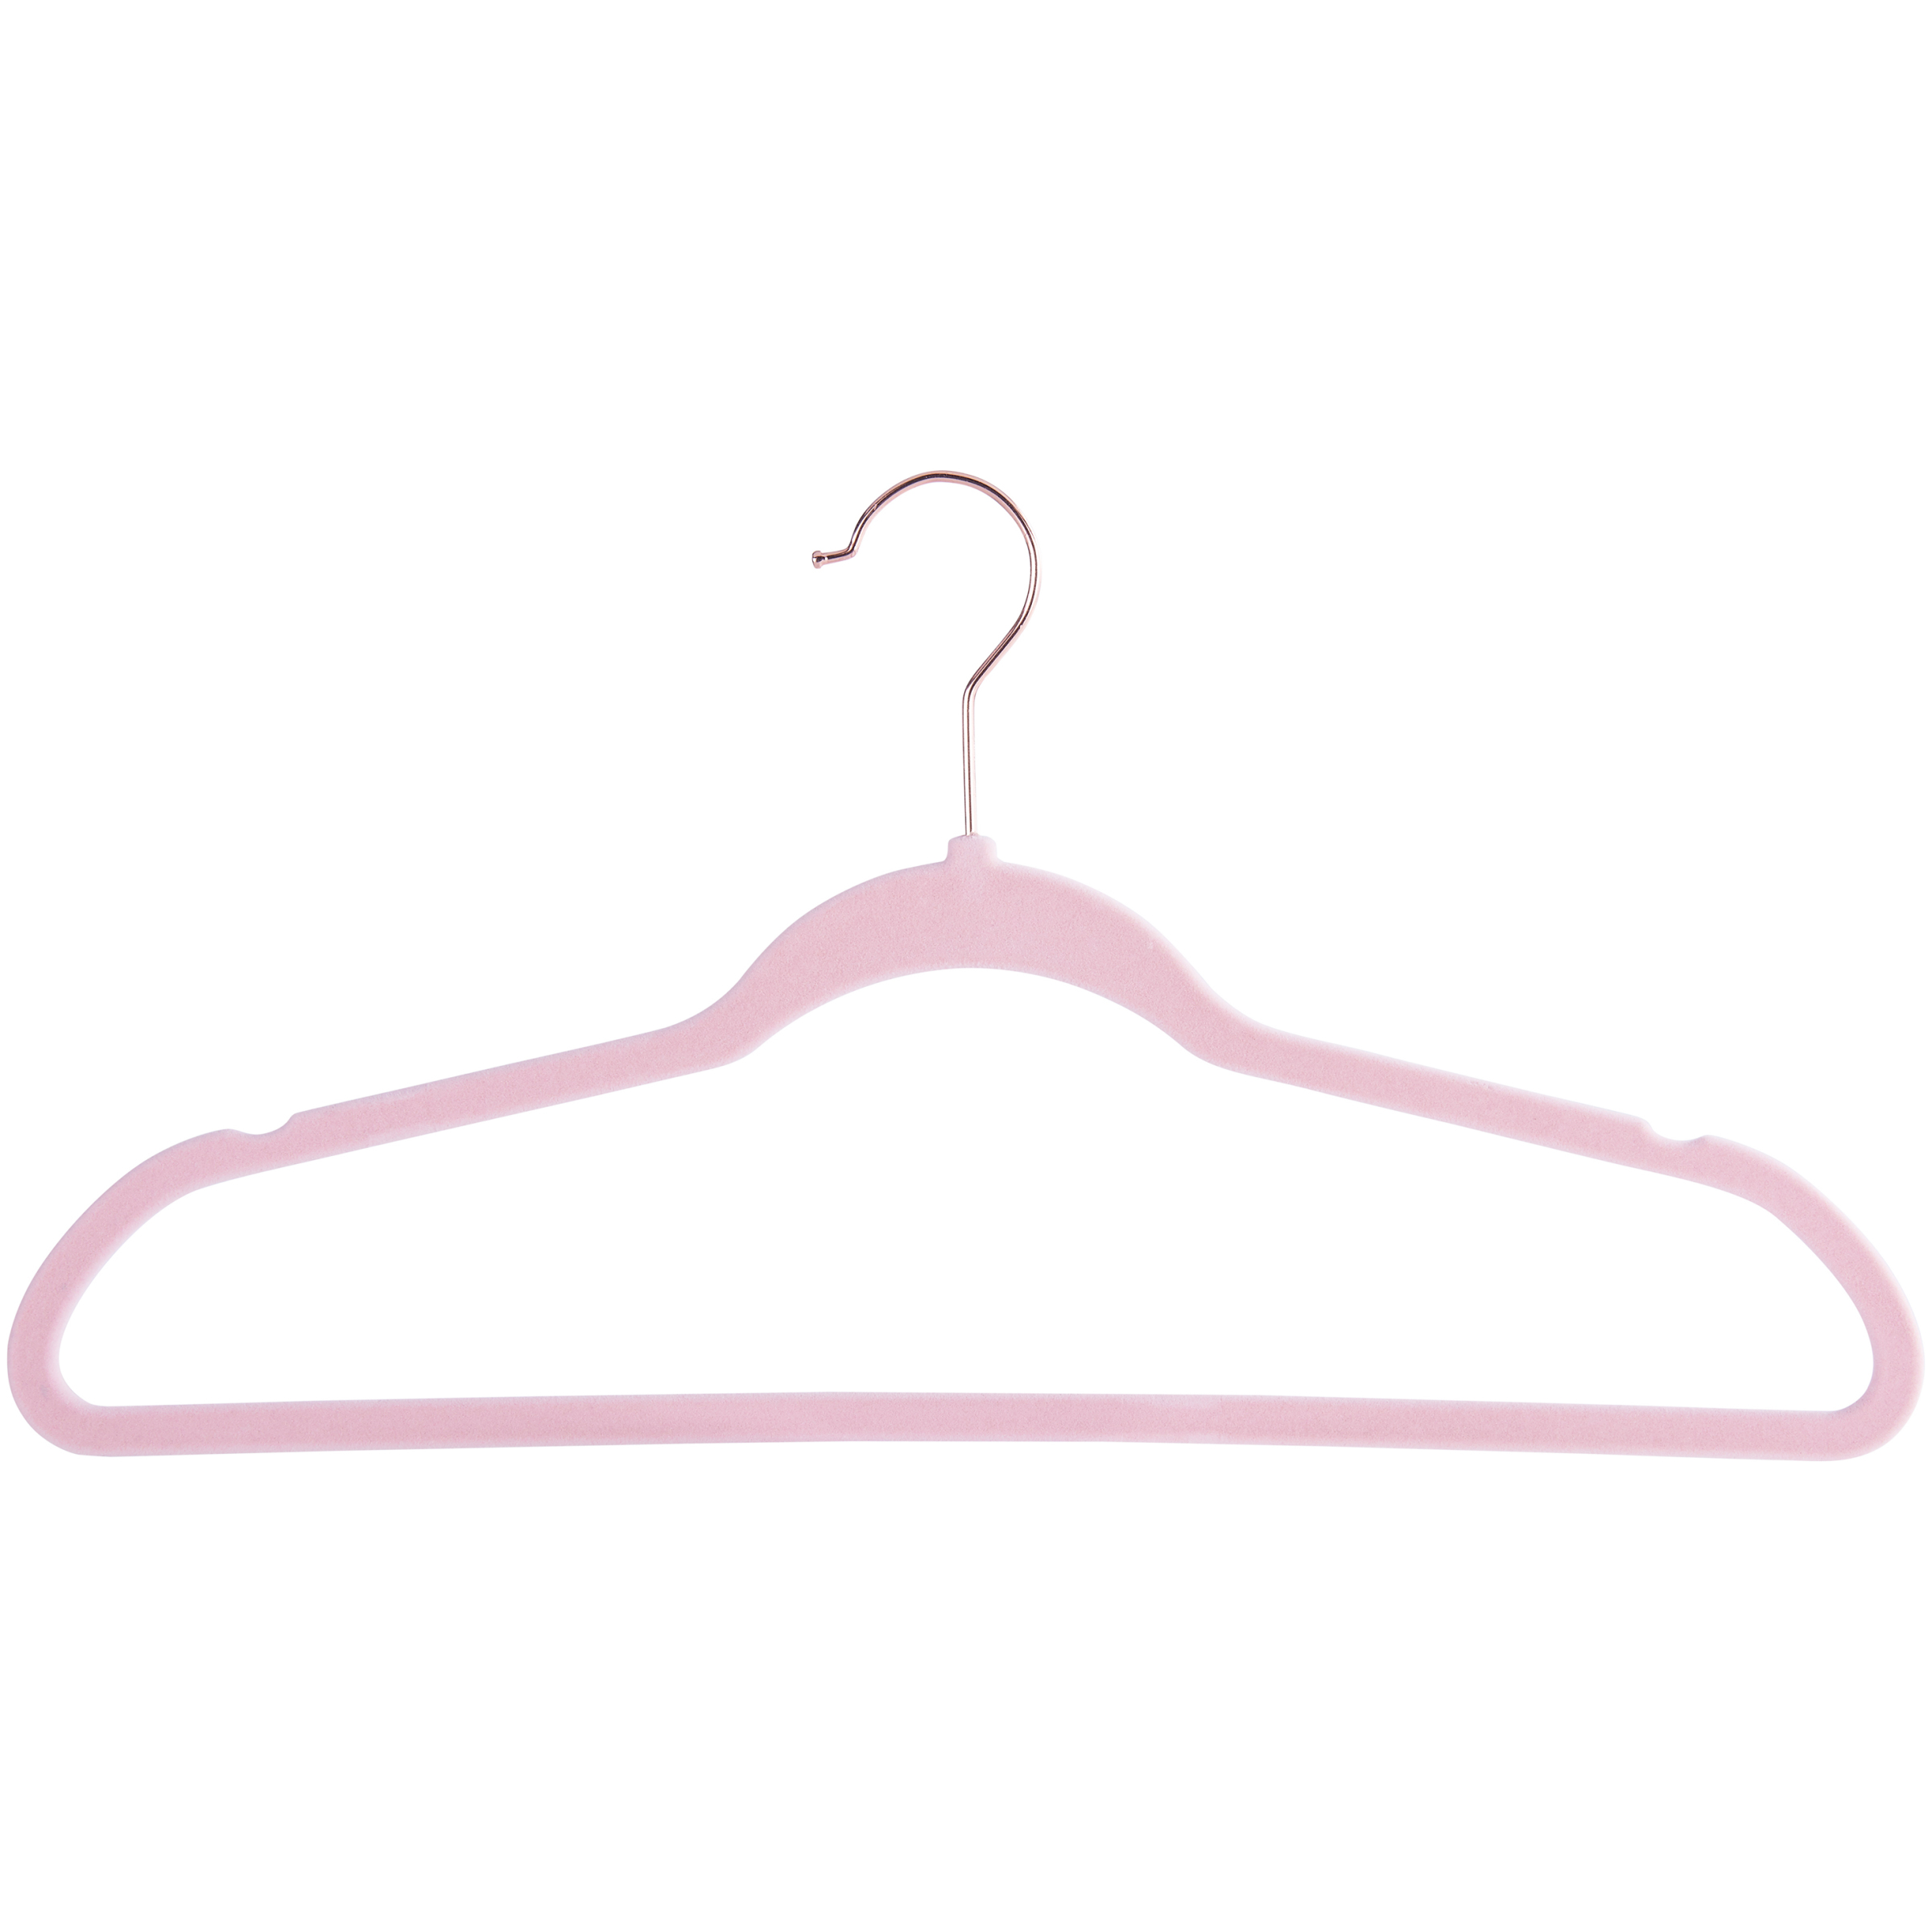 Discontinued-Better Homes & Gardens Nonslip Ultra Slim Flocked Suit Hangers, Pink, 90 Pack - image 4 of 4